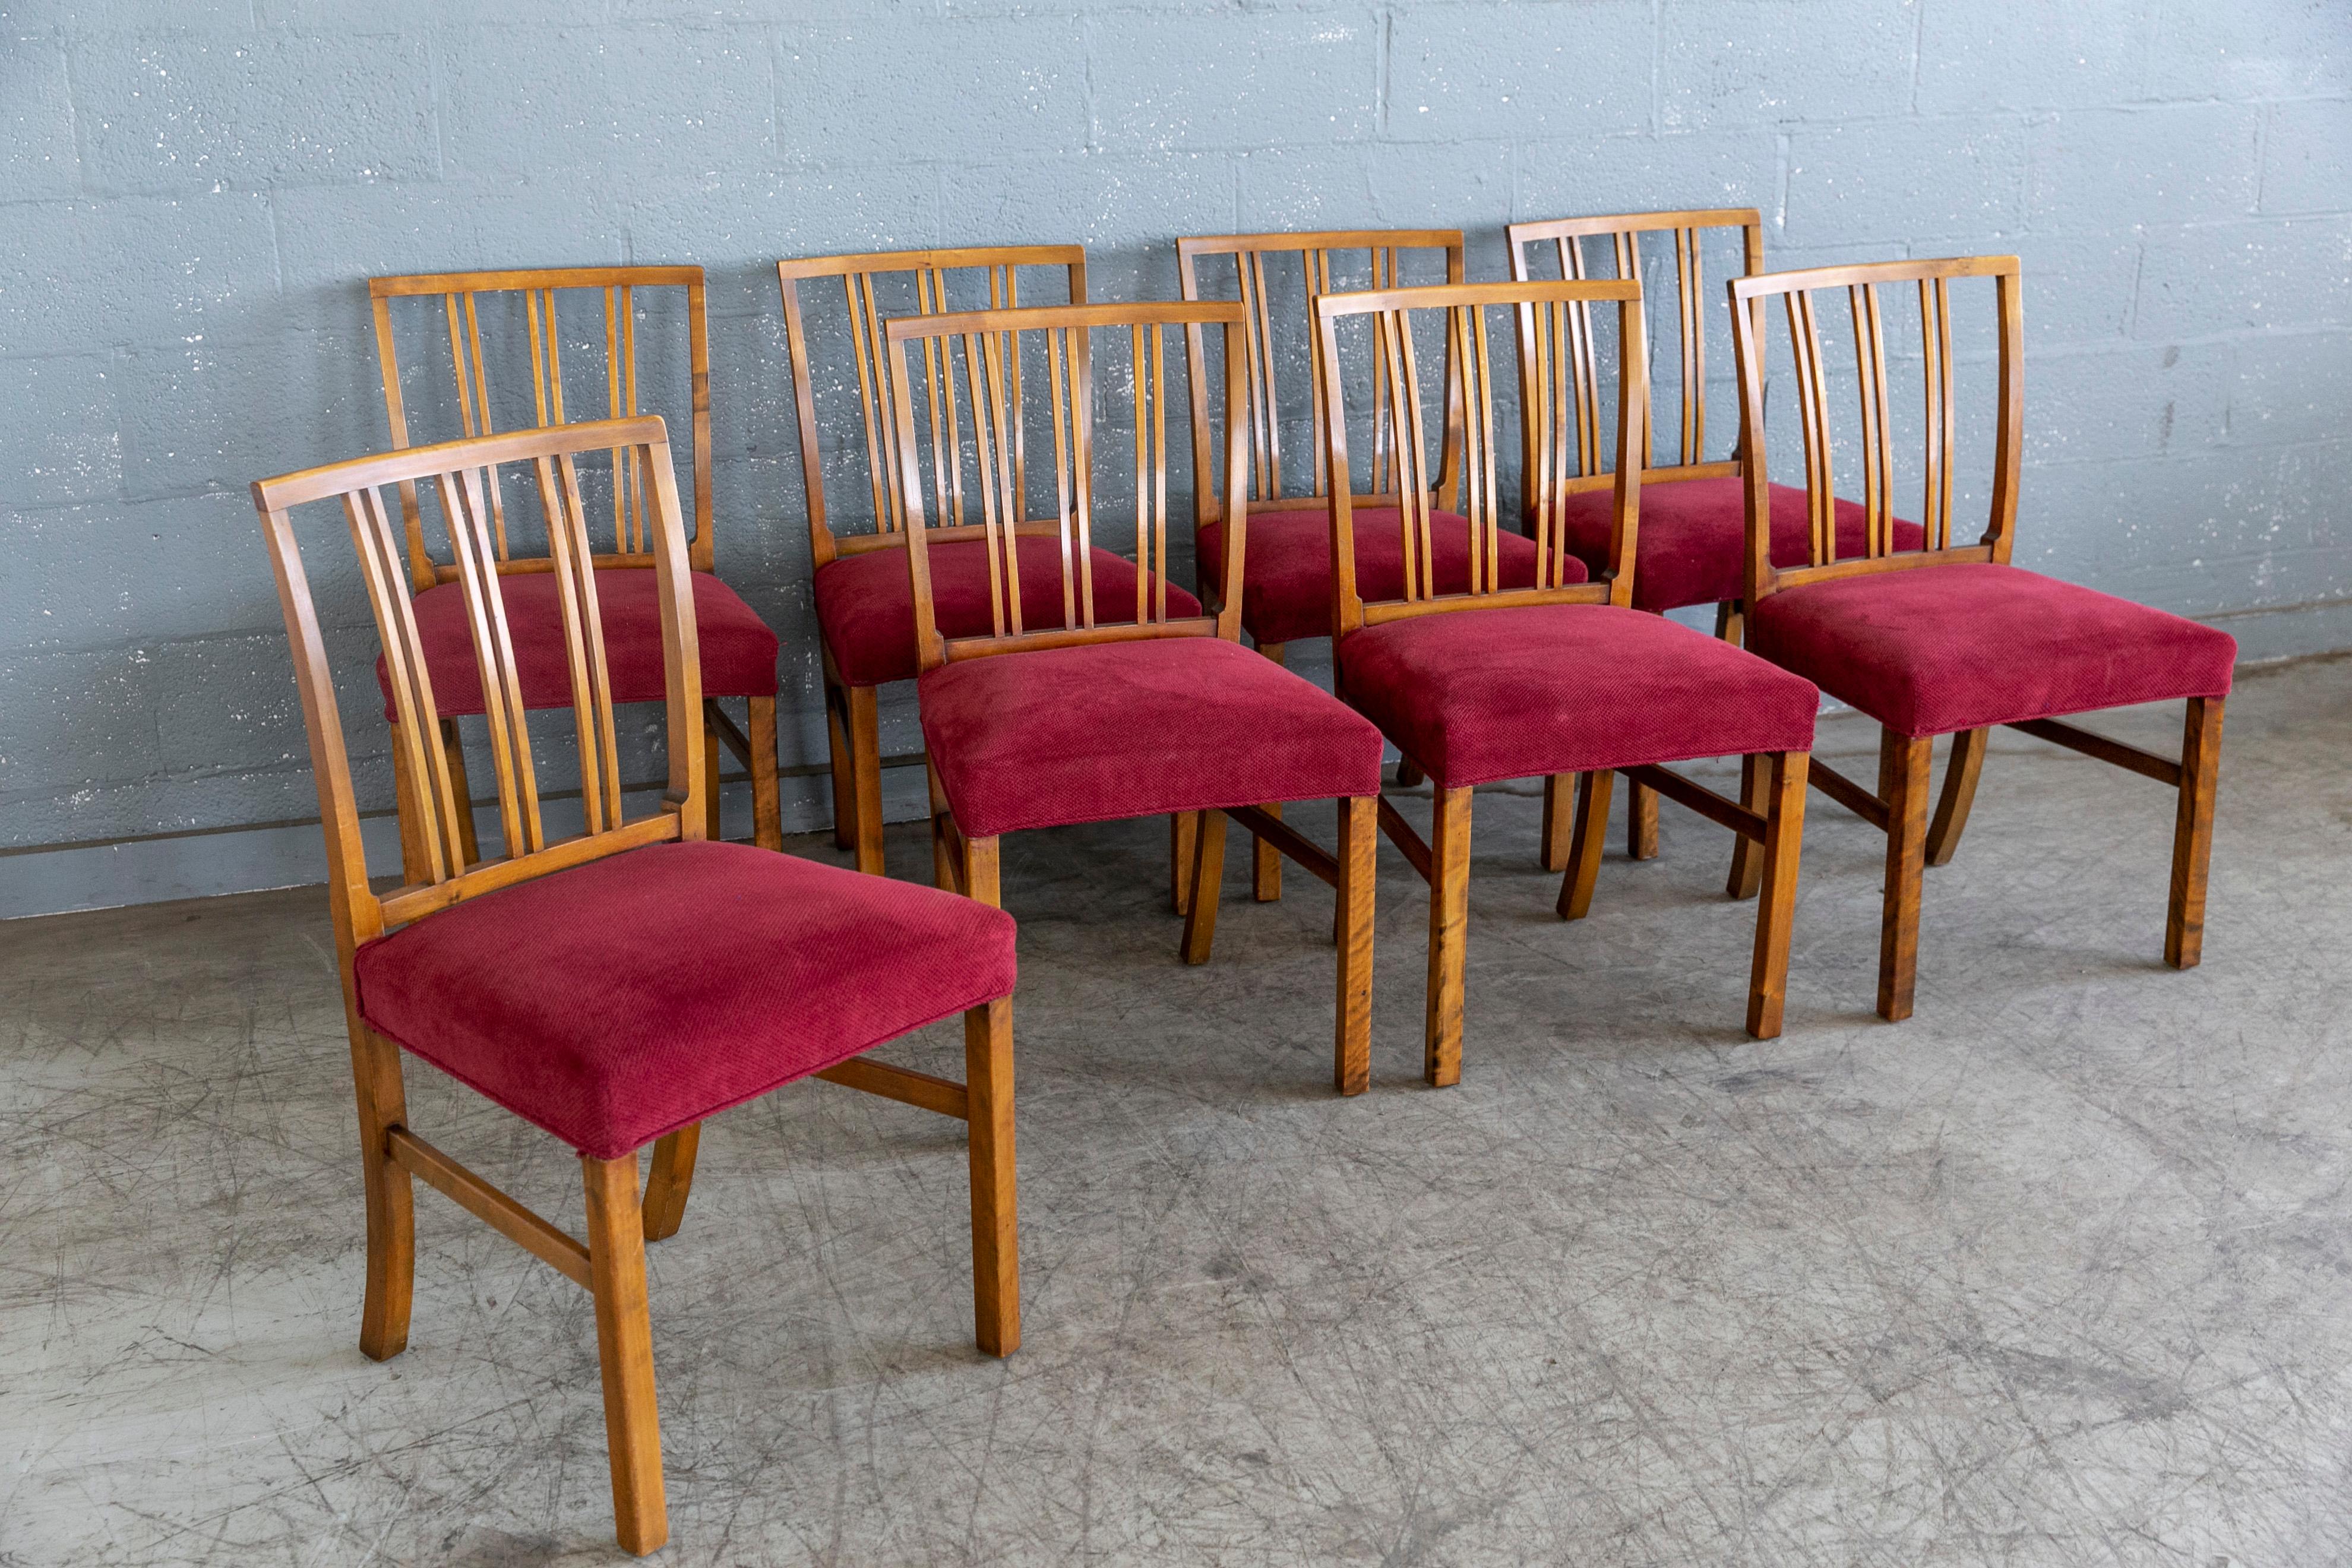 Scandinavian Modern Set of 8 Danish Dining Chairs in Walnut by Th Schmidt 1940's For Sale